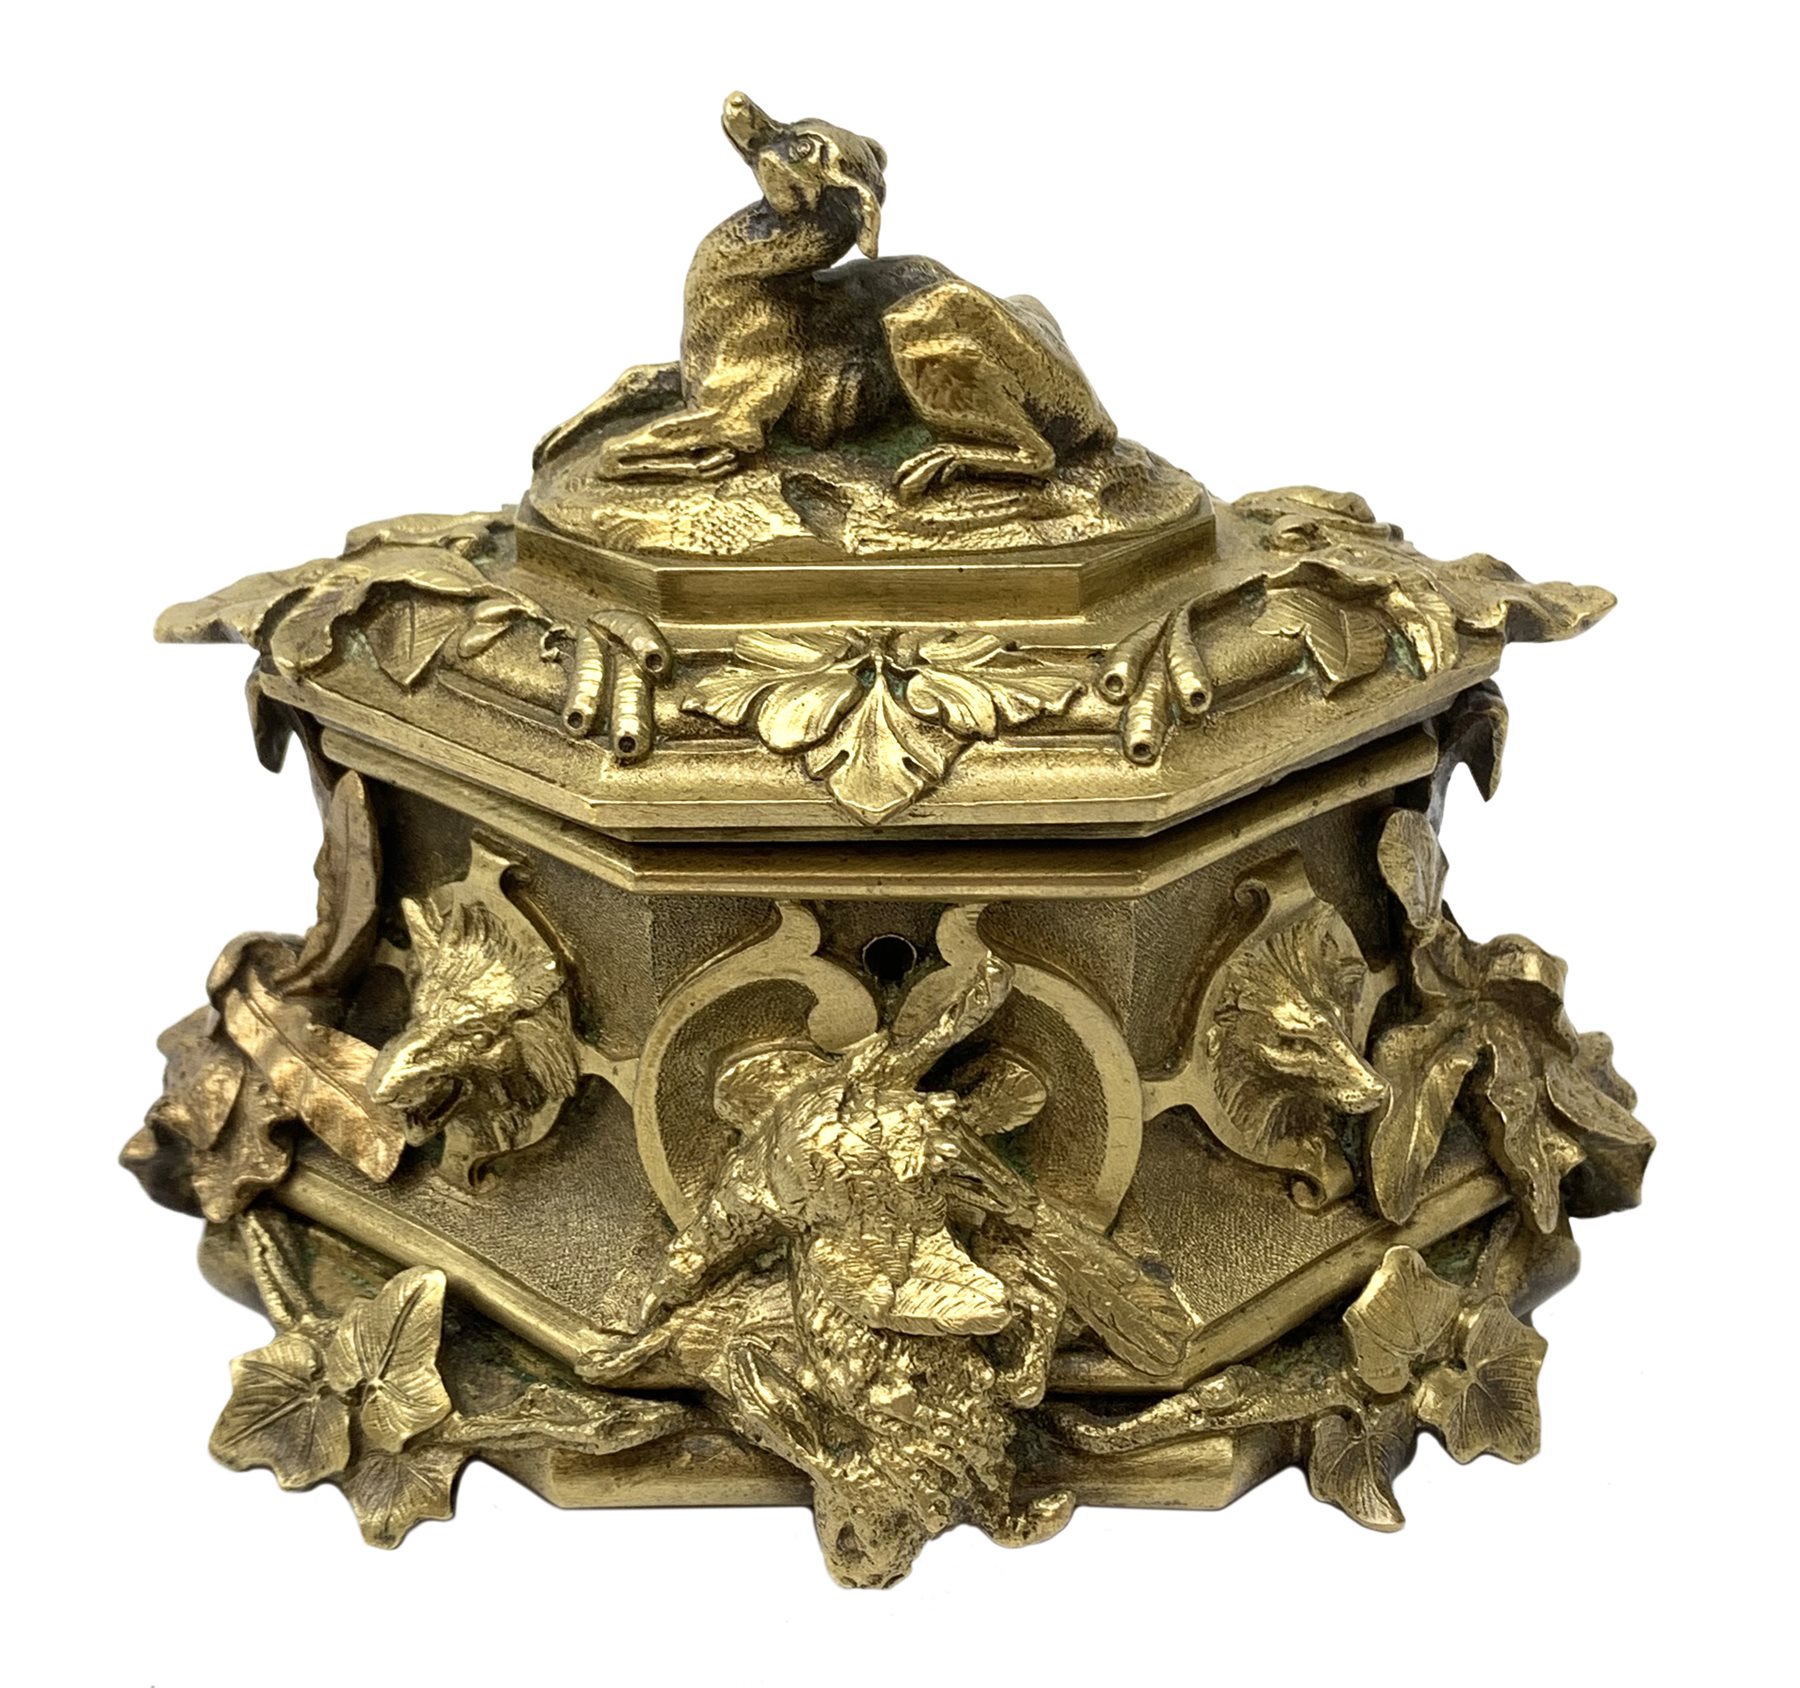 Late 19th century gilt bronze casket, of lozenge form with cast and applied detail in the form of ho